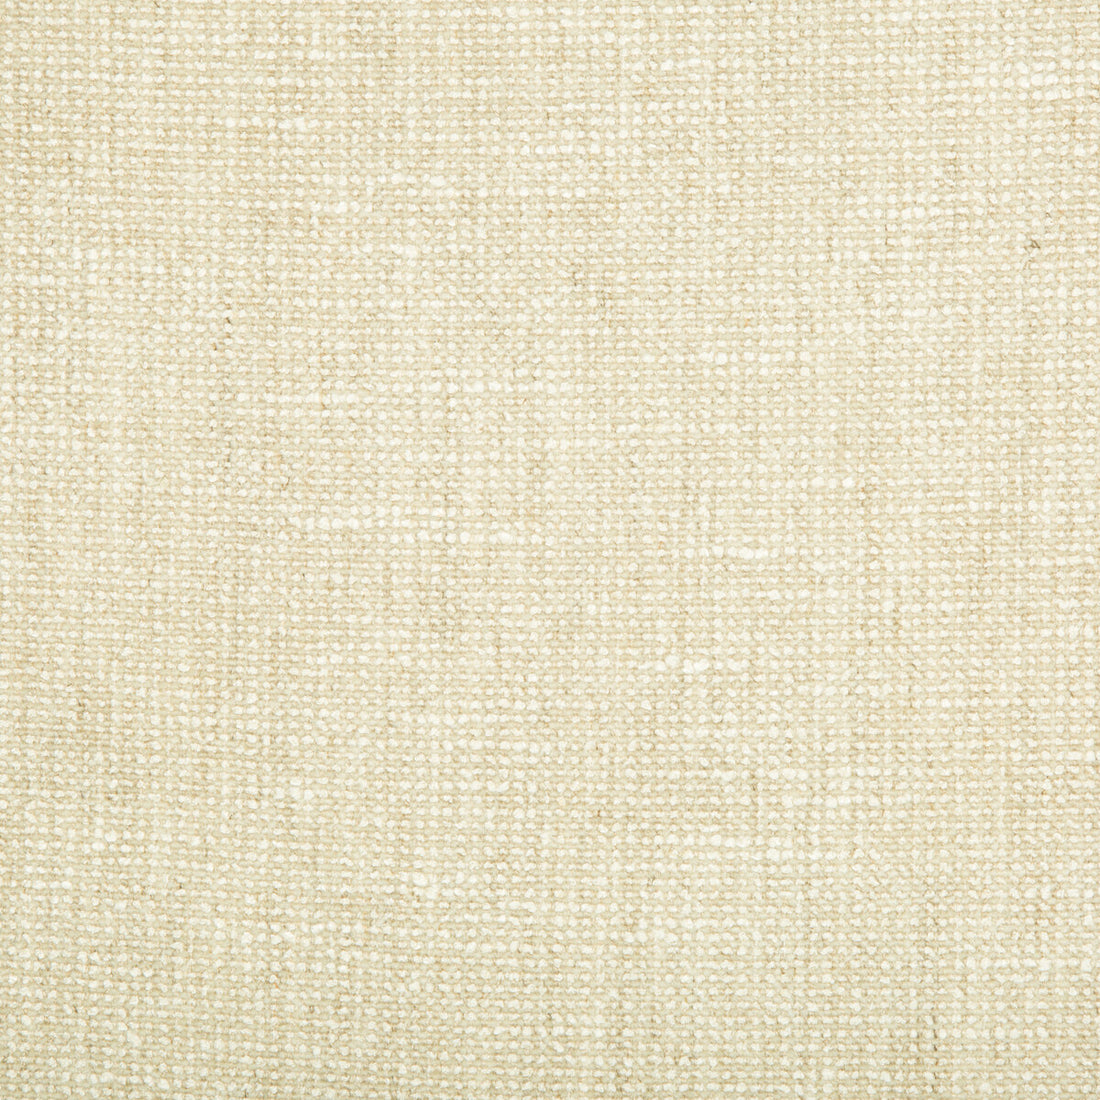 Skiffle fabric in stone color - pattern 34449.16.0 - by Kravet Couture